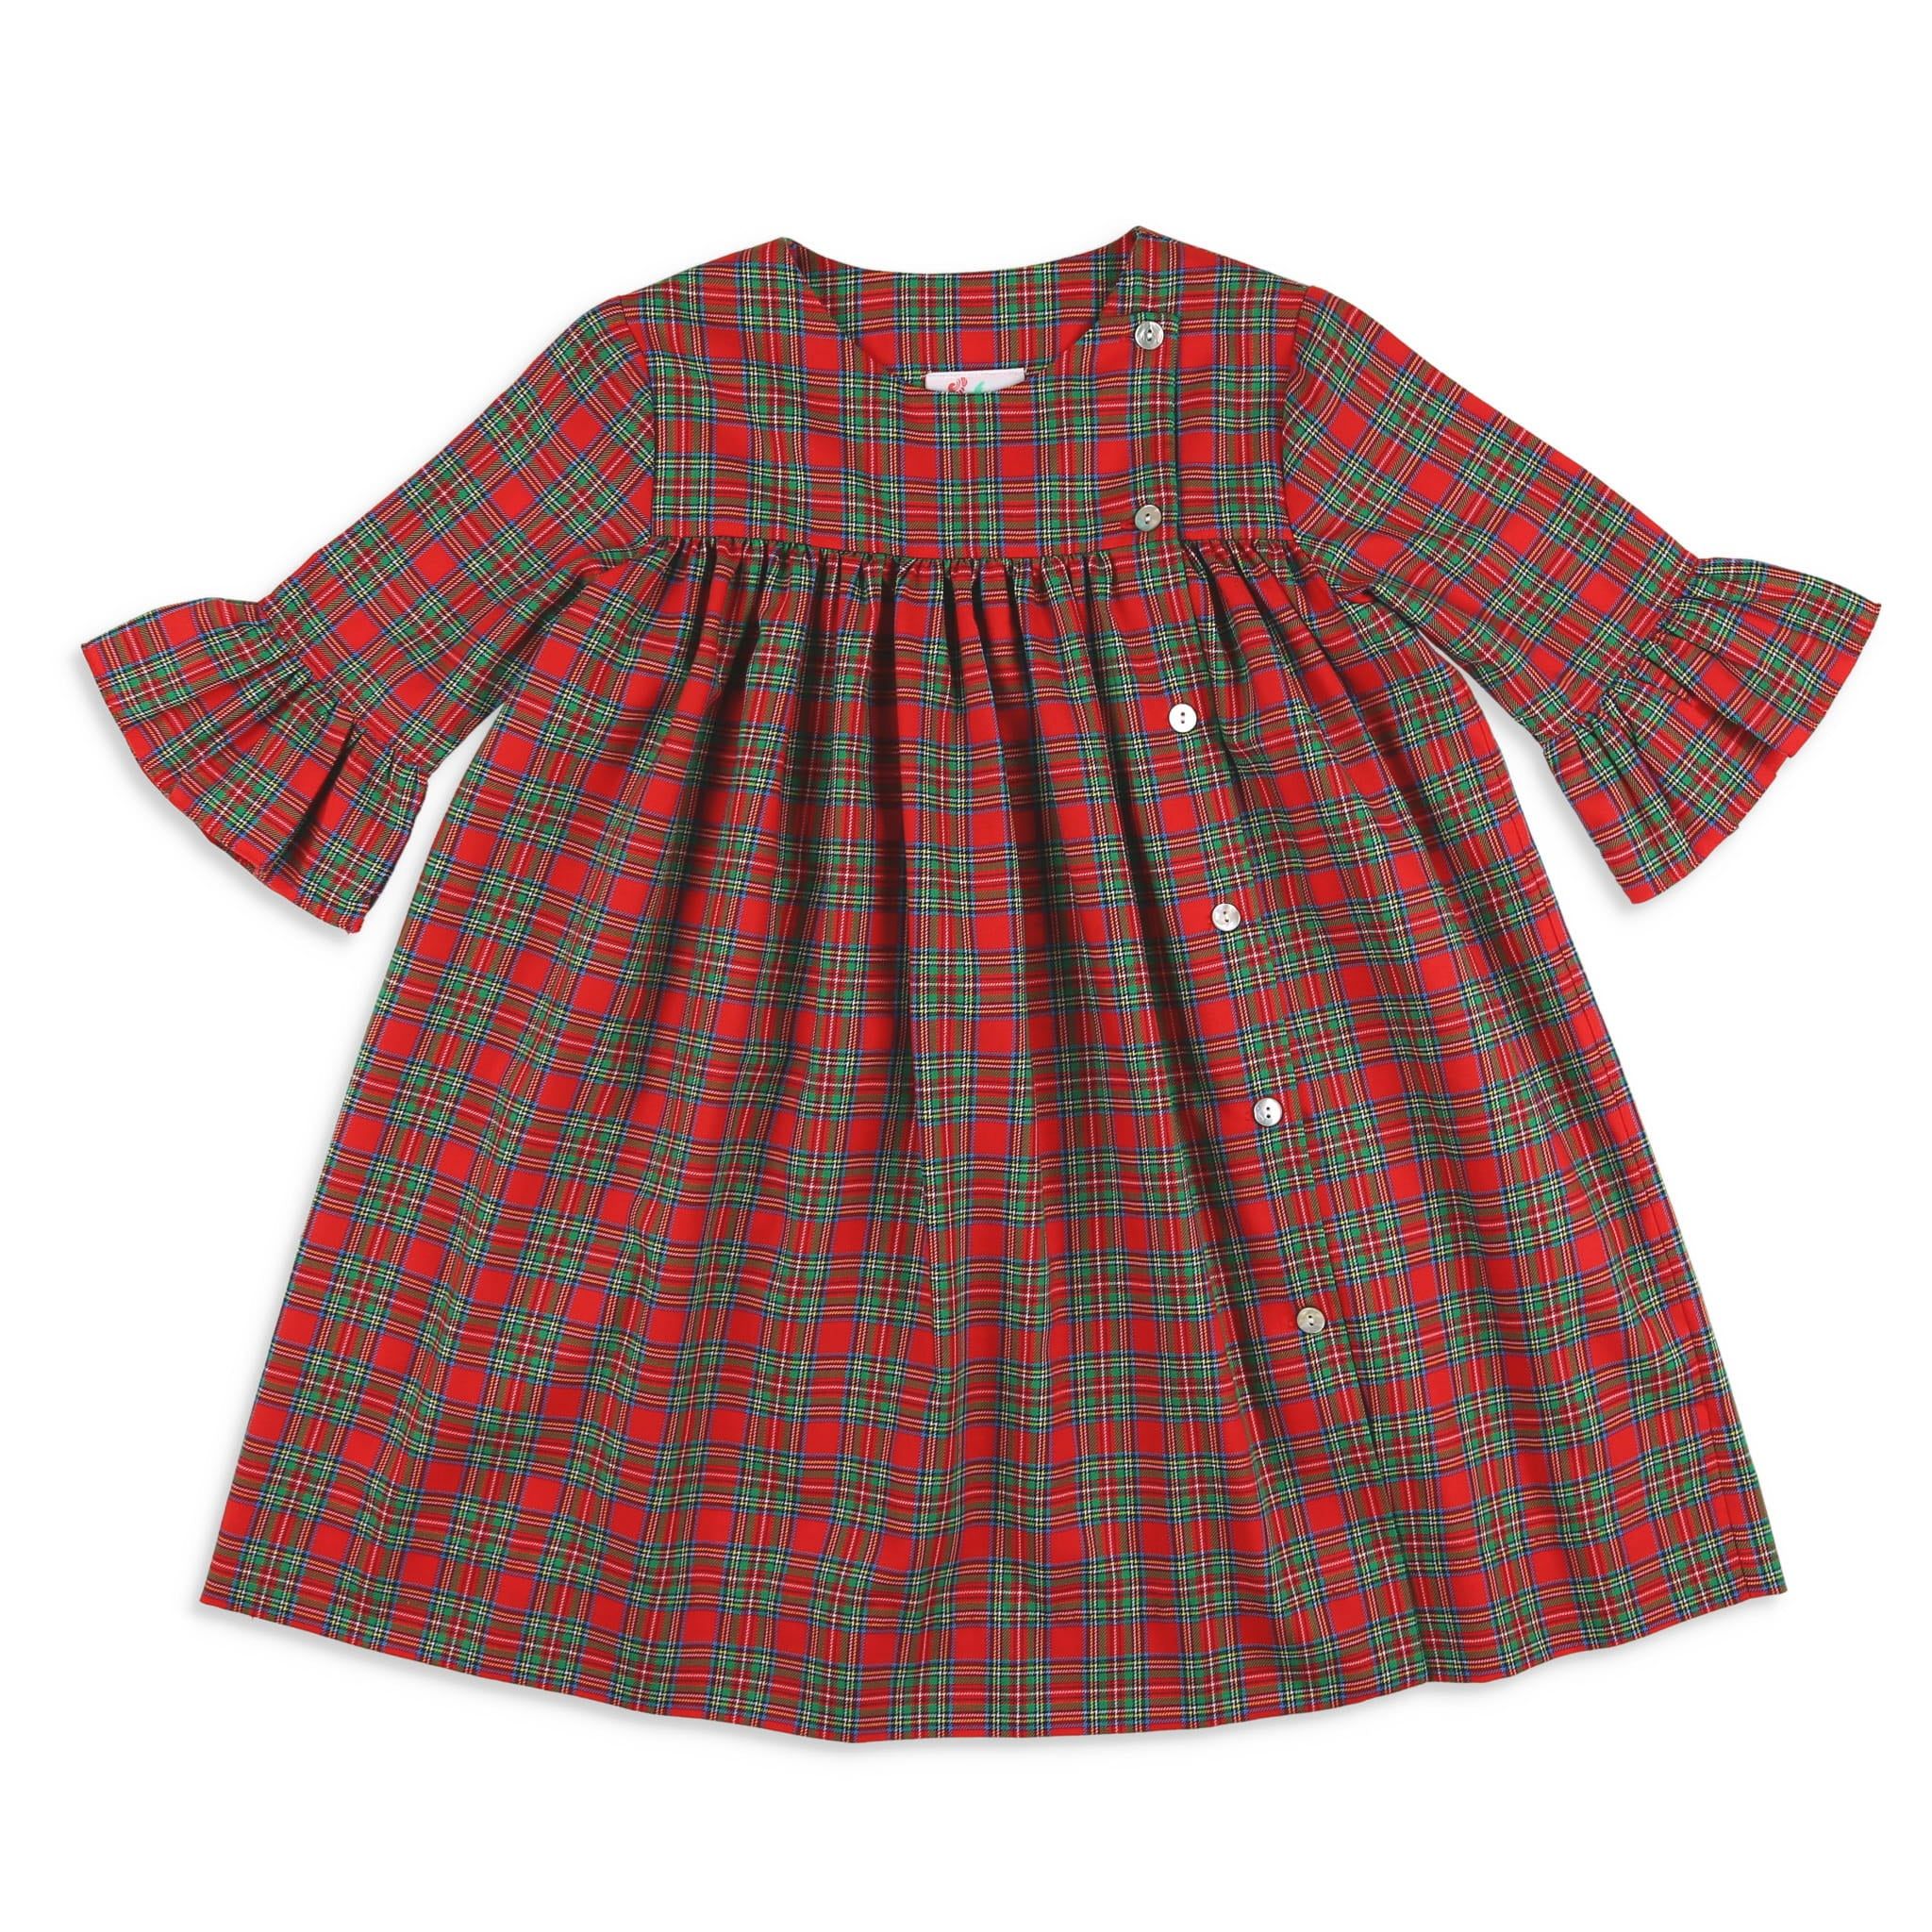 Girls Picture Perfect Plaid Sallie Dress - Shrimp and Grits Kids - Shrimp and Grits Kids | Shrimp and Grits Kids